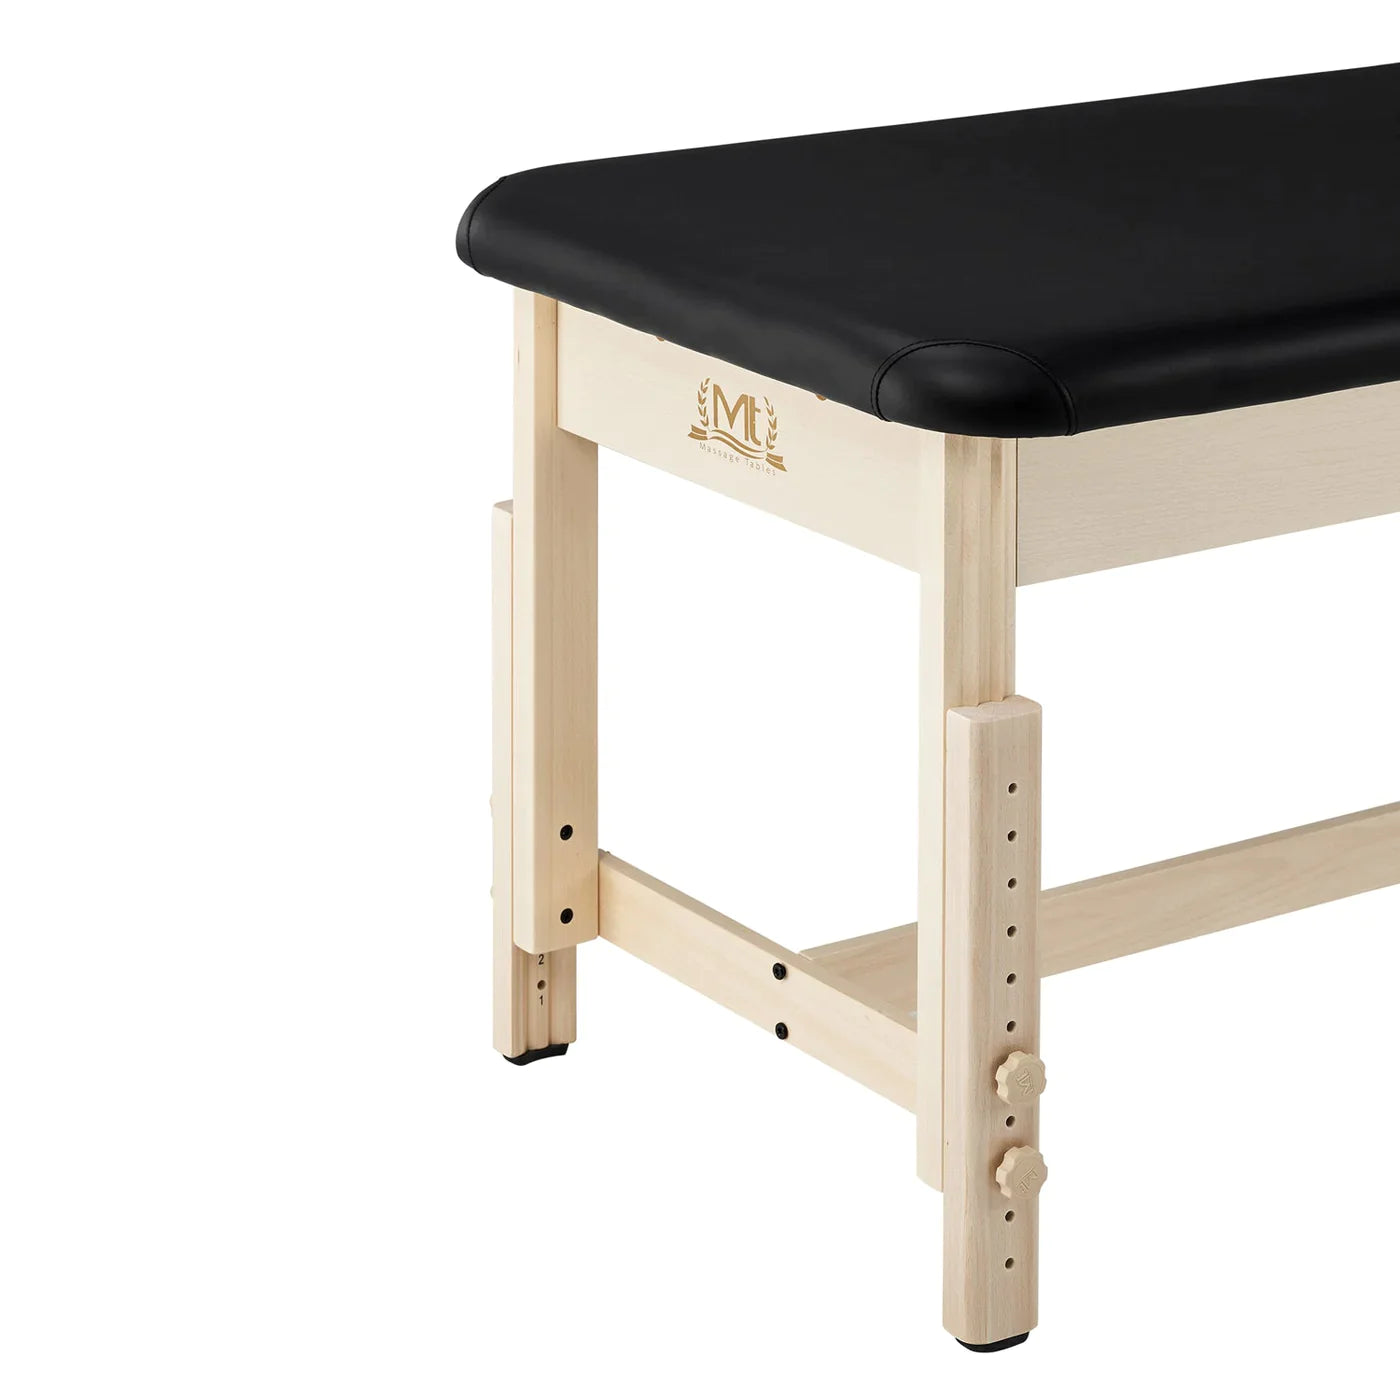 Bella2bello 28" Harvey Treatment™ Stationary Massage Table with Ambient Light System